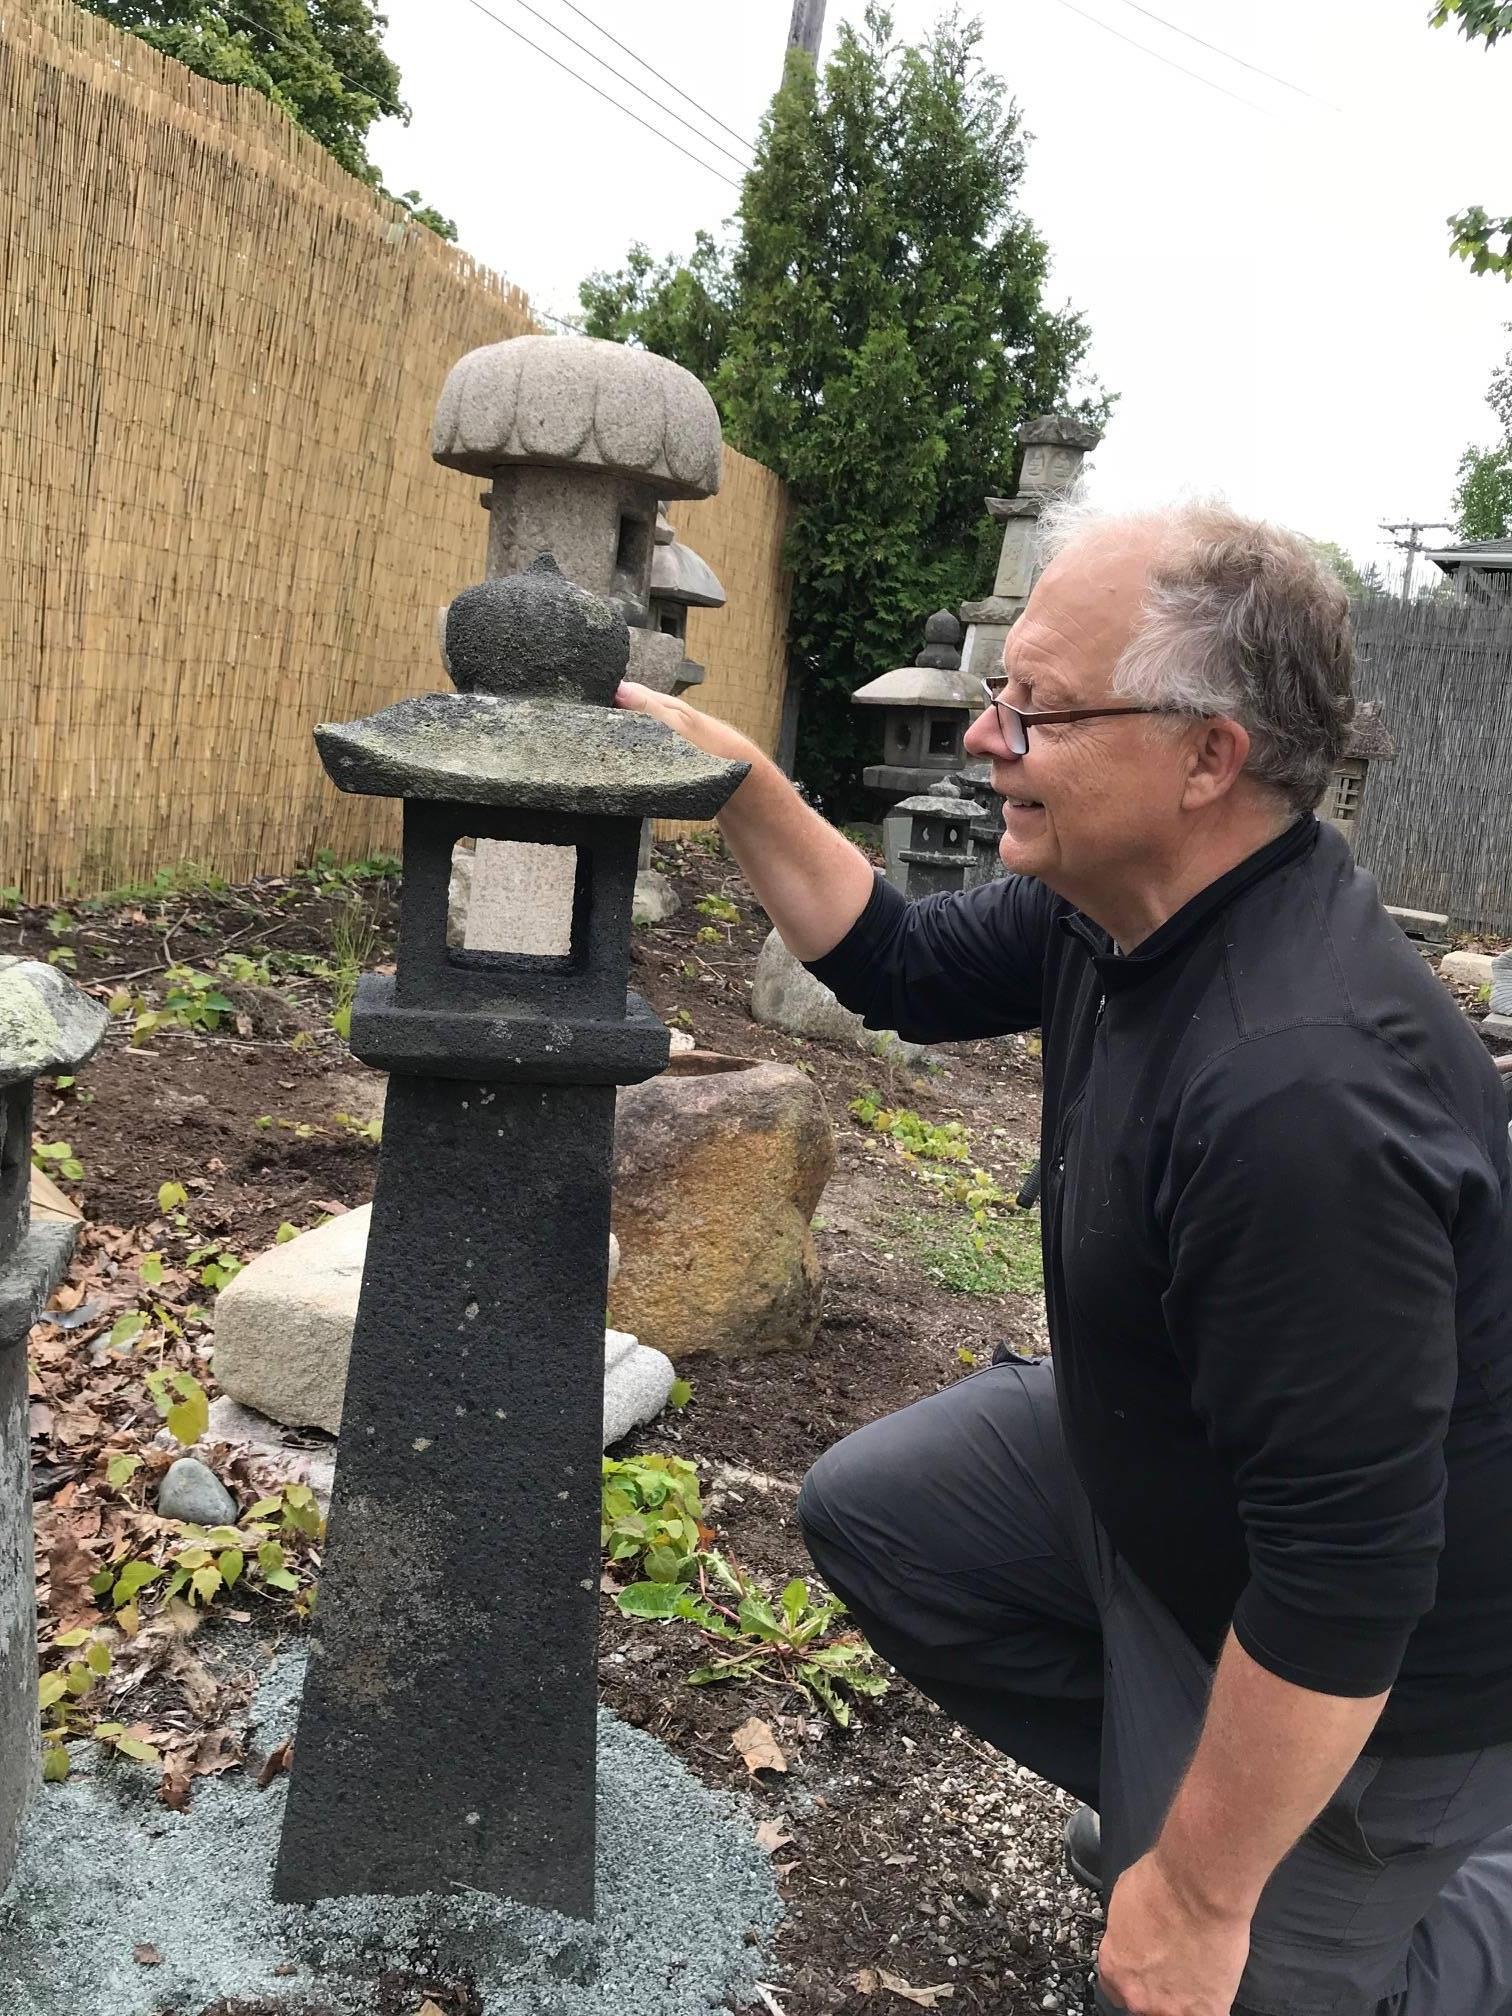 From our recent Japanese acquisitions travels.

An antique beauty with a handsome dark black patina, 31 inches tall.

Japan, a fine pathway stone lantern with beautifully lichen and patina from great age

They work especially well at night with an